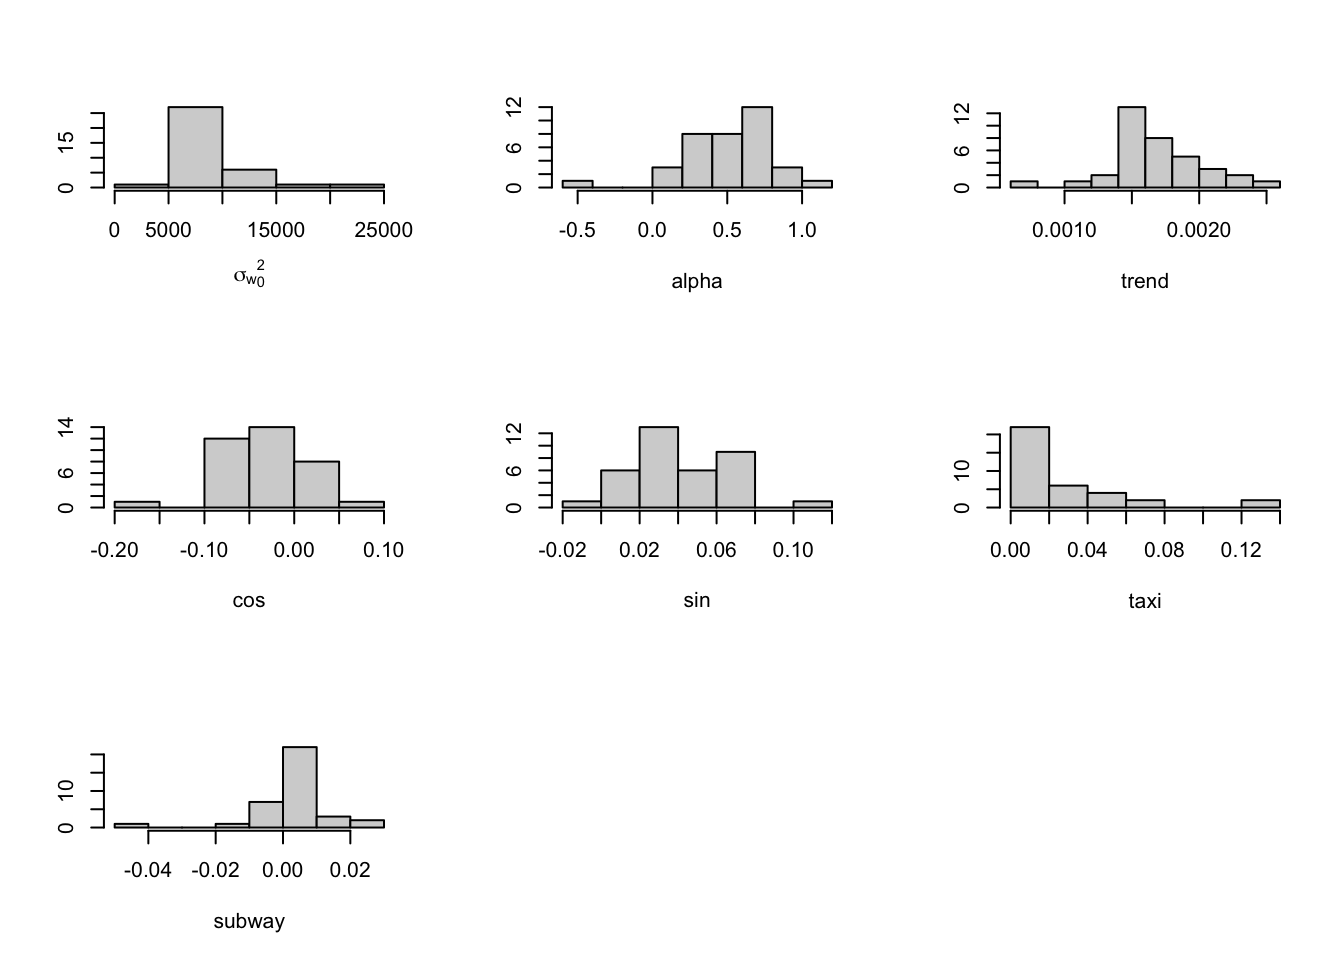 Histograms of the estimated coefficients from Model Z1 across taxi zones.